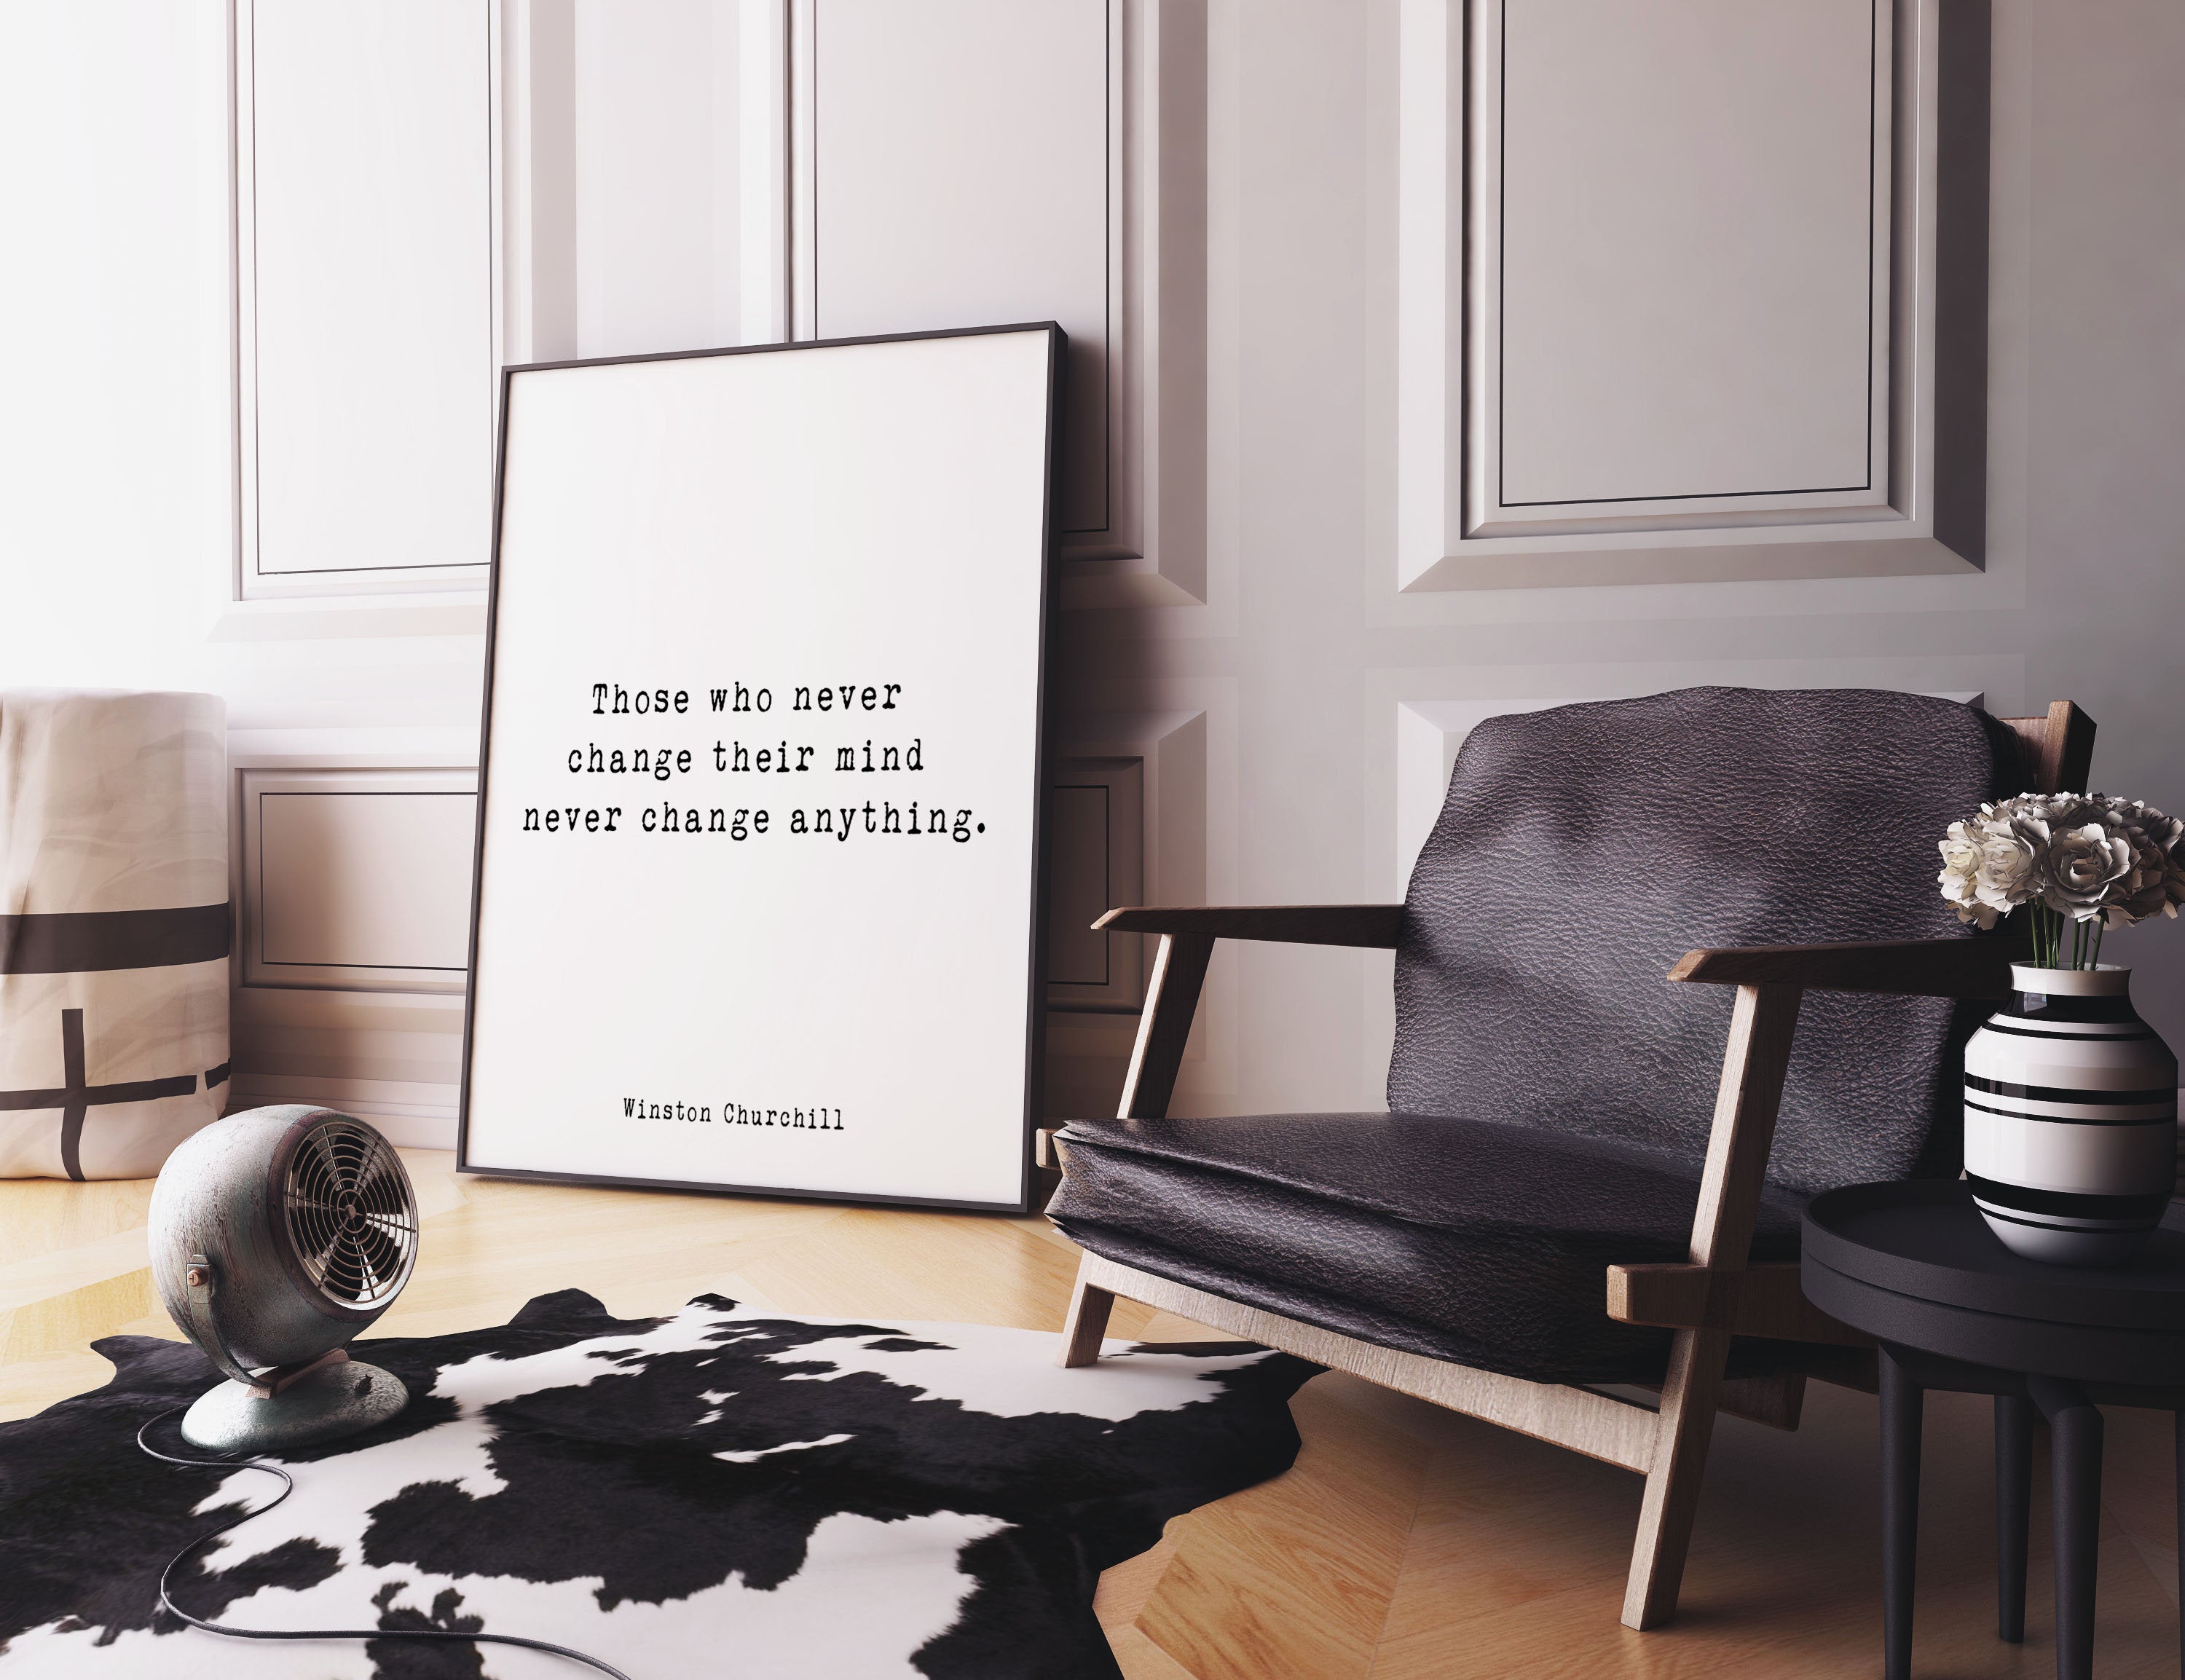 Winston Churchill  Quote Print, Those Who Never Change Their Mind Never Change Anything, Unframed Wall Art Prints - BookQuoteDecor